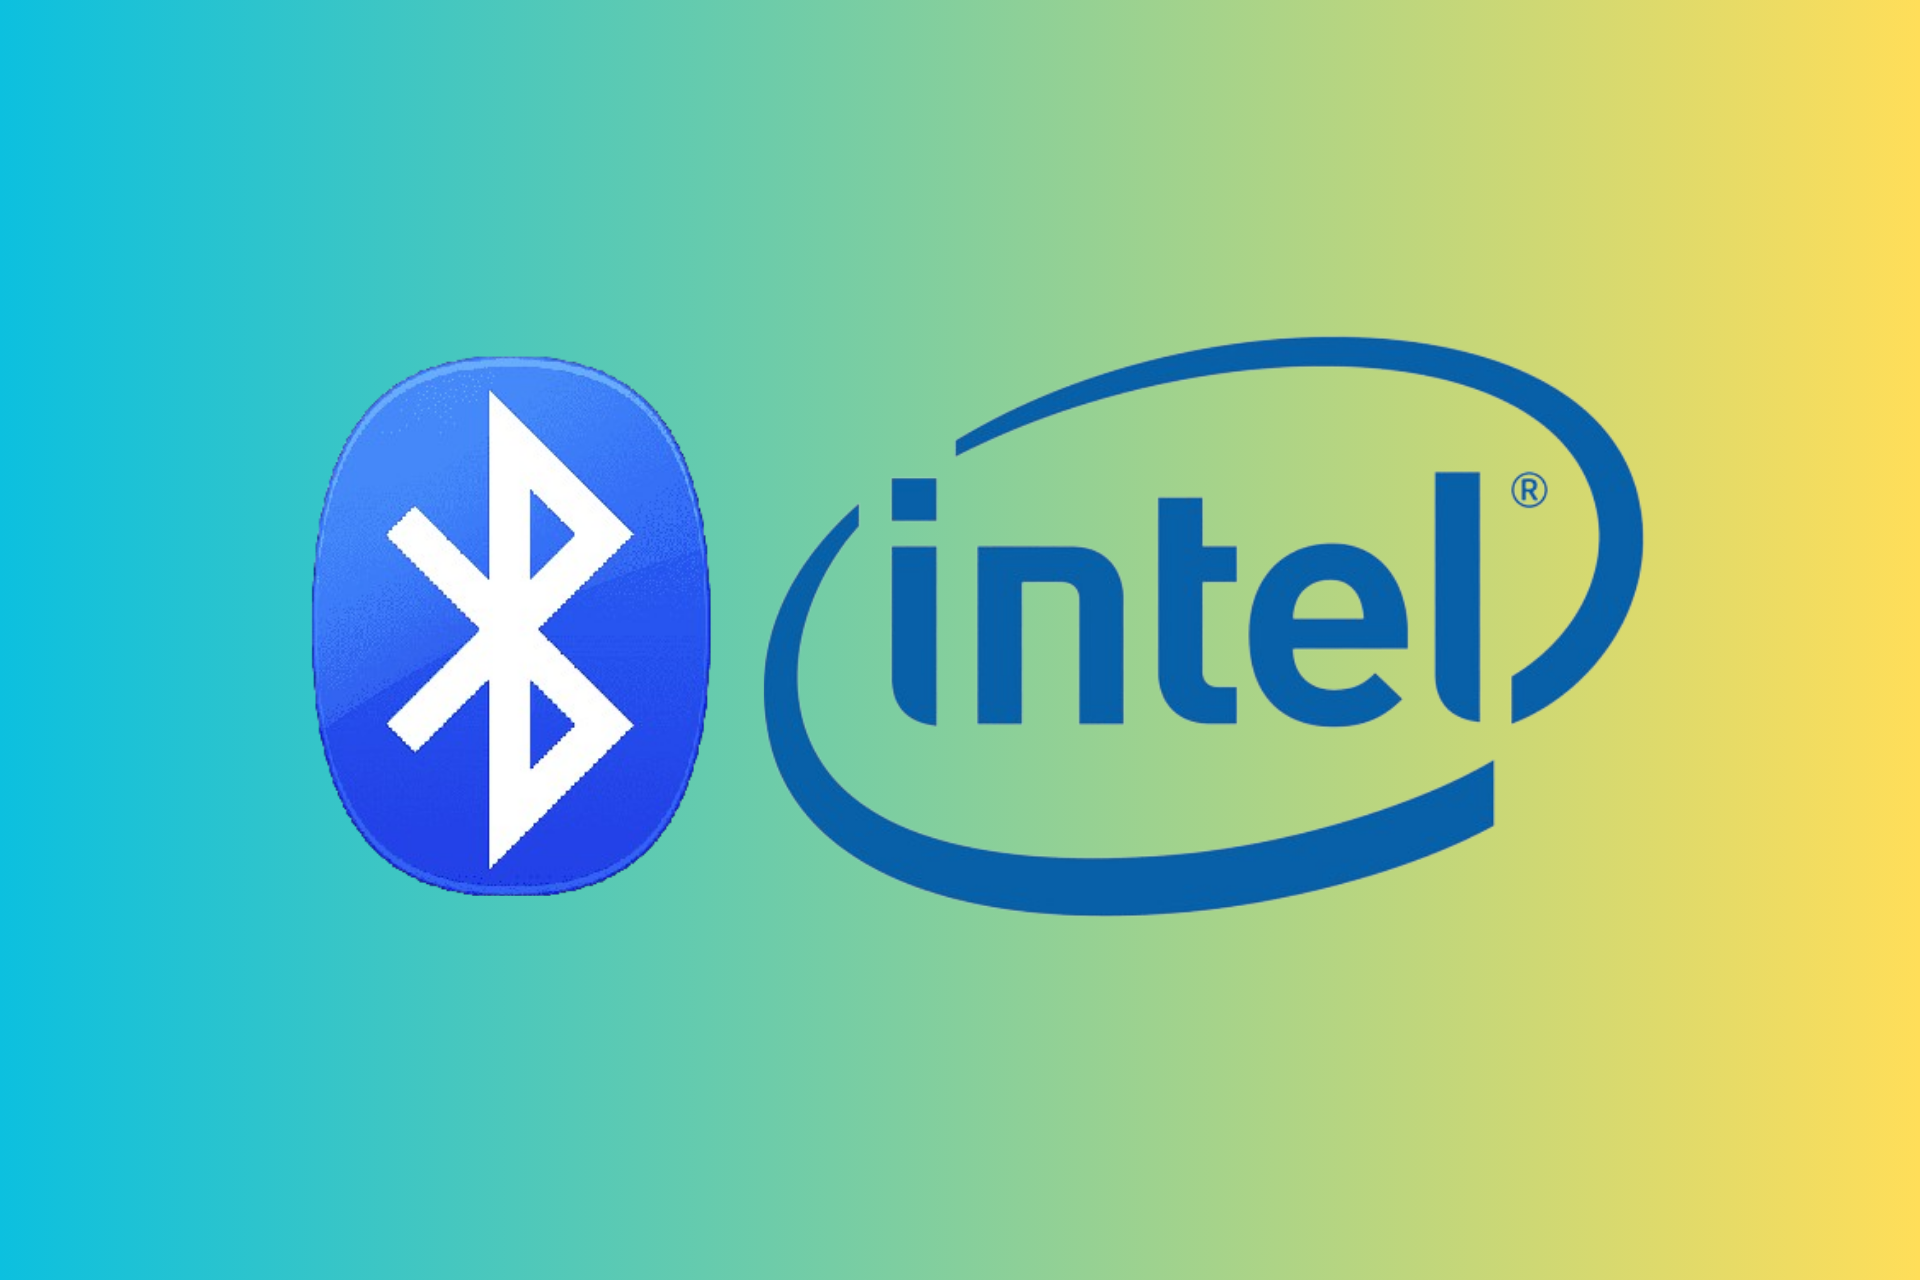 After Wi-Fi drivers, Intel updates its Bluetooth drivers as well